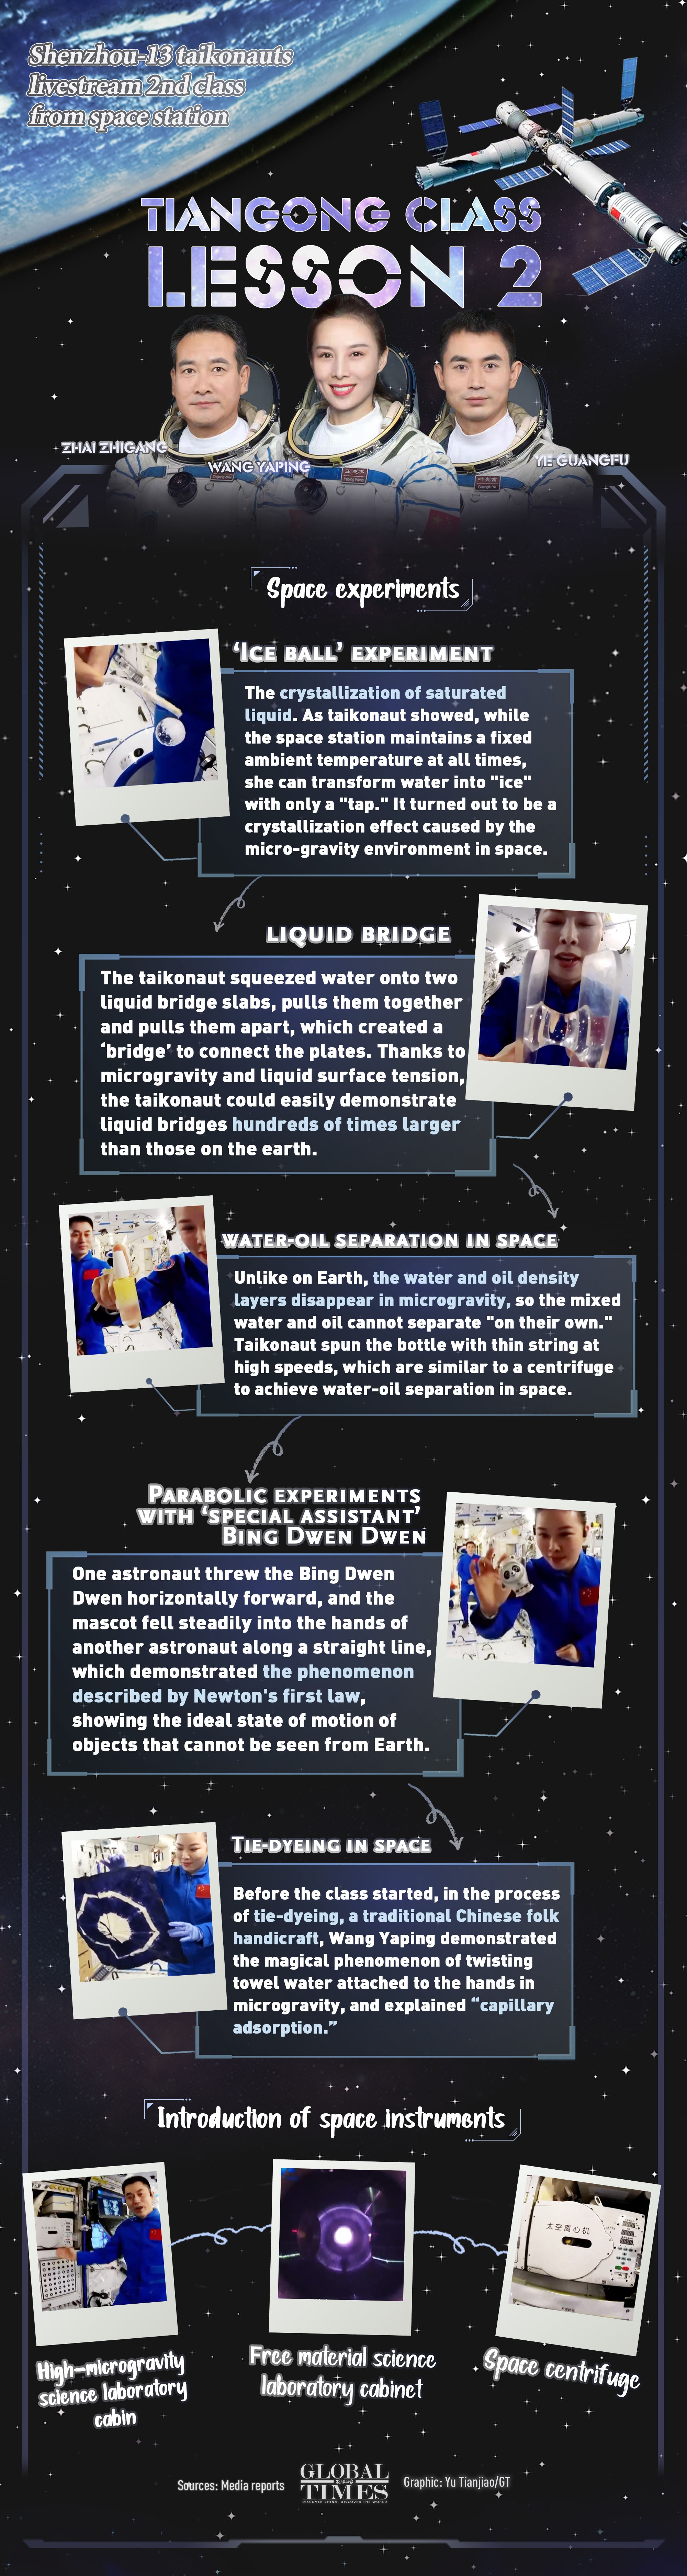 -BingDwenDwen somersaults to demonstrate parabolic experiment
-Transform water into ice ball with only a tap
Check out Shenzhou-13 taikonauts' 2nd live session of Tiangong classroom series, which inspires youngsters' dreams.